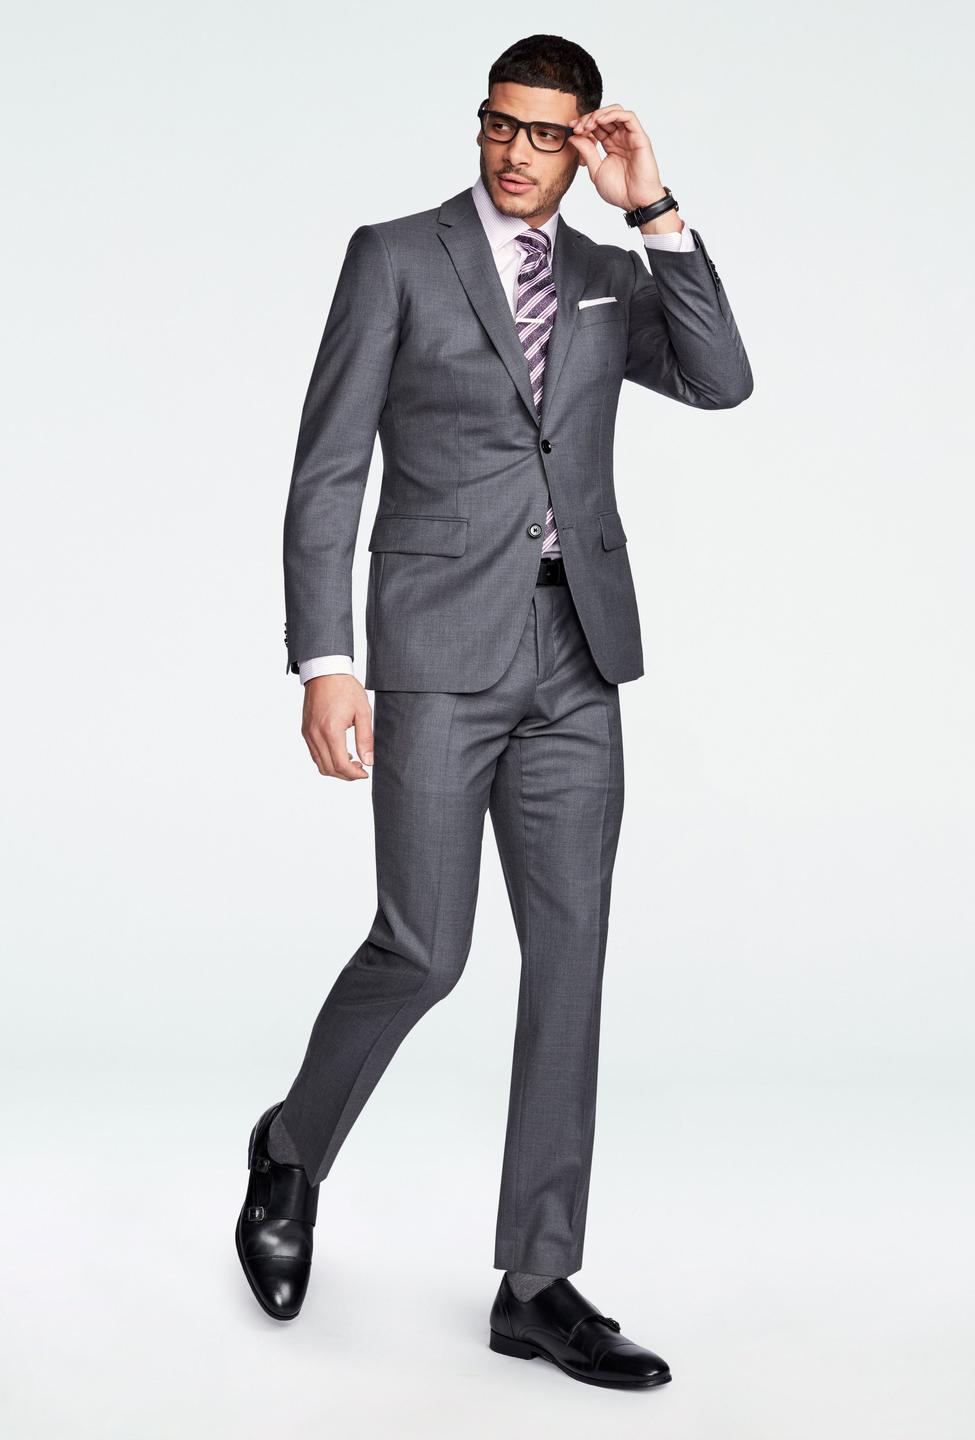 Gray blazer - Solid Design from Luxury Indochino Collection